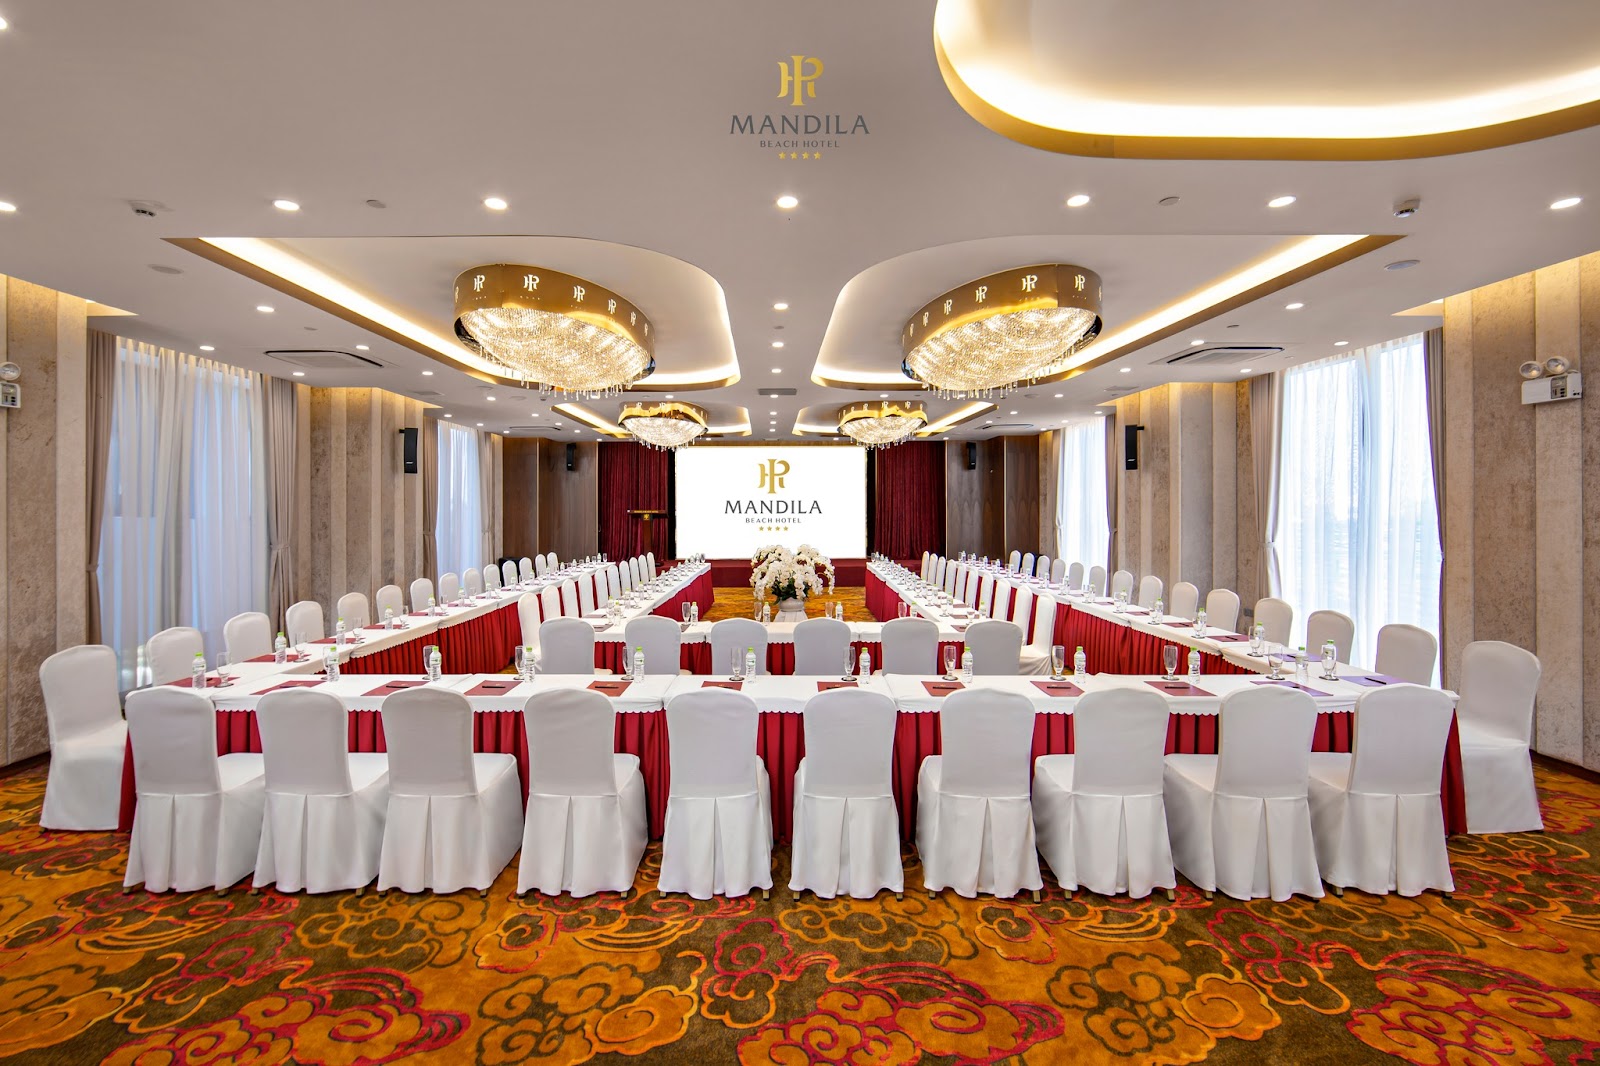 How to organize a company party at a 4-star Da Nang hotel - (5) Conference room arranged U-shaped tables and chairs